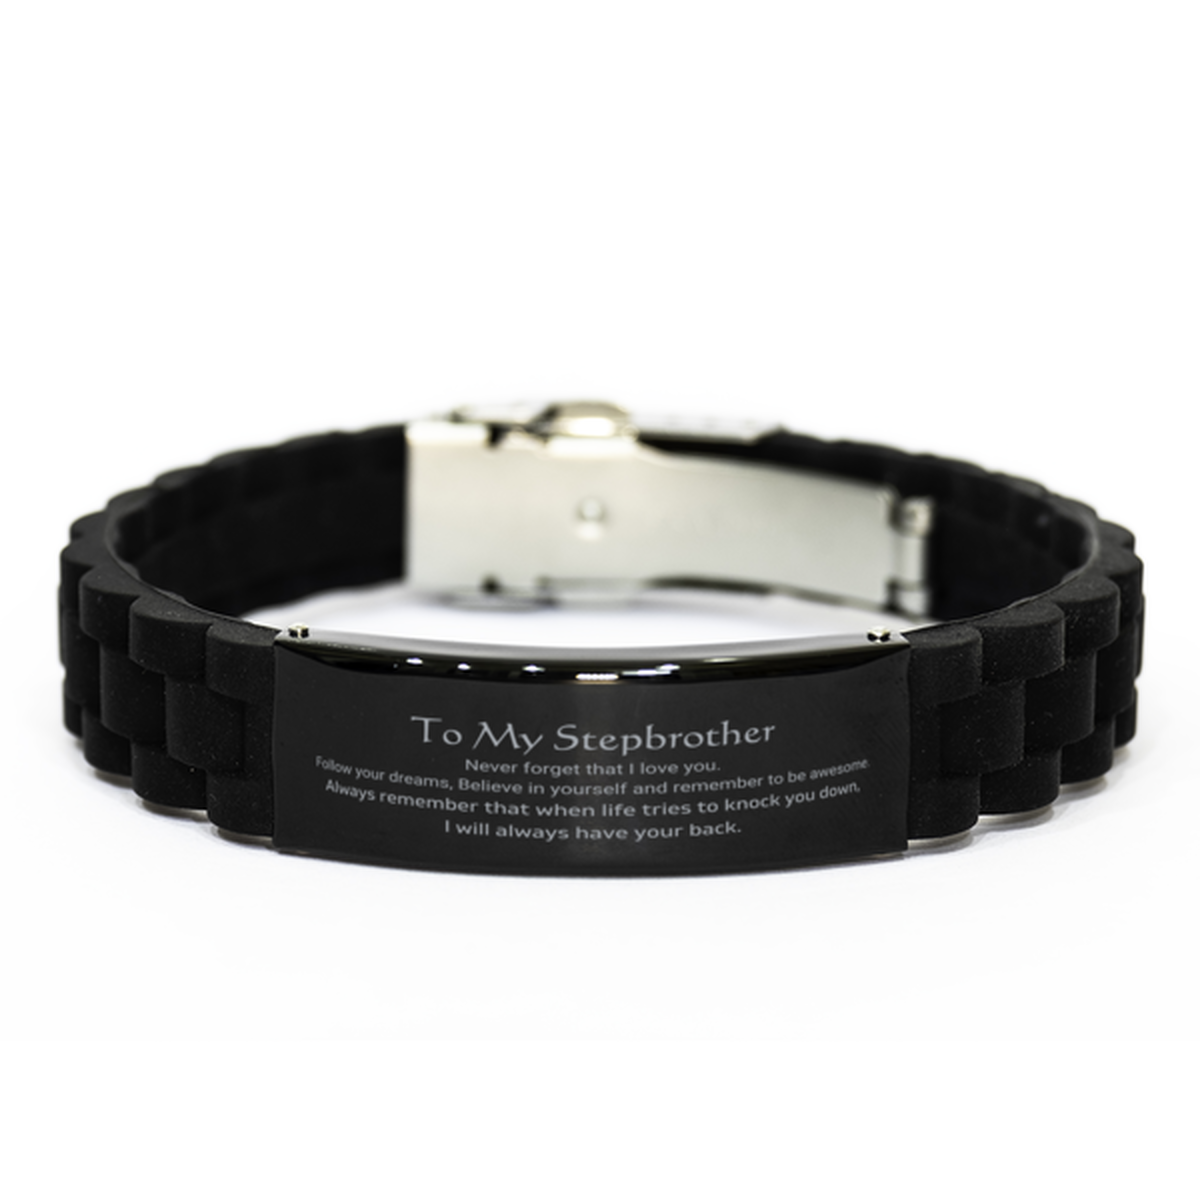 Inspirational Gifts for Stepbrother, Follow your dreams, Believe in yourself, Stepbrother Black Glidelock Clasp Bracelet, Birthday Christmas Unique Gifts For Stepbrother